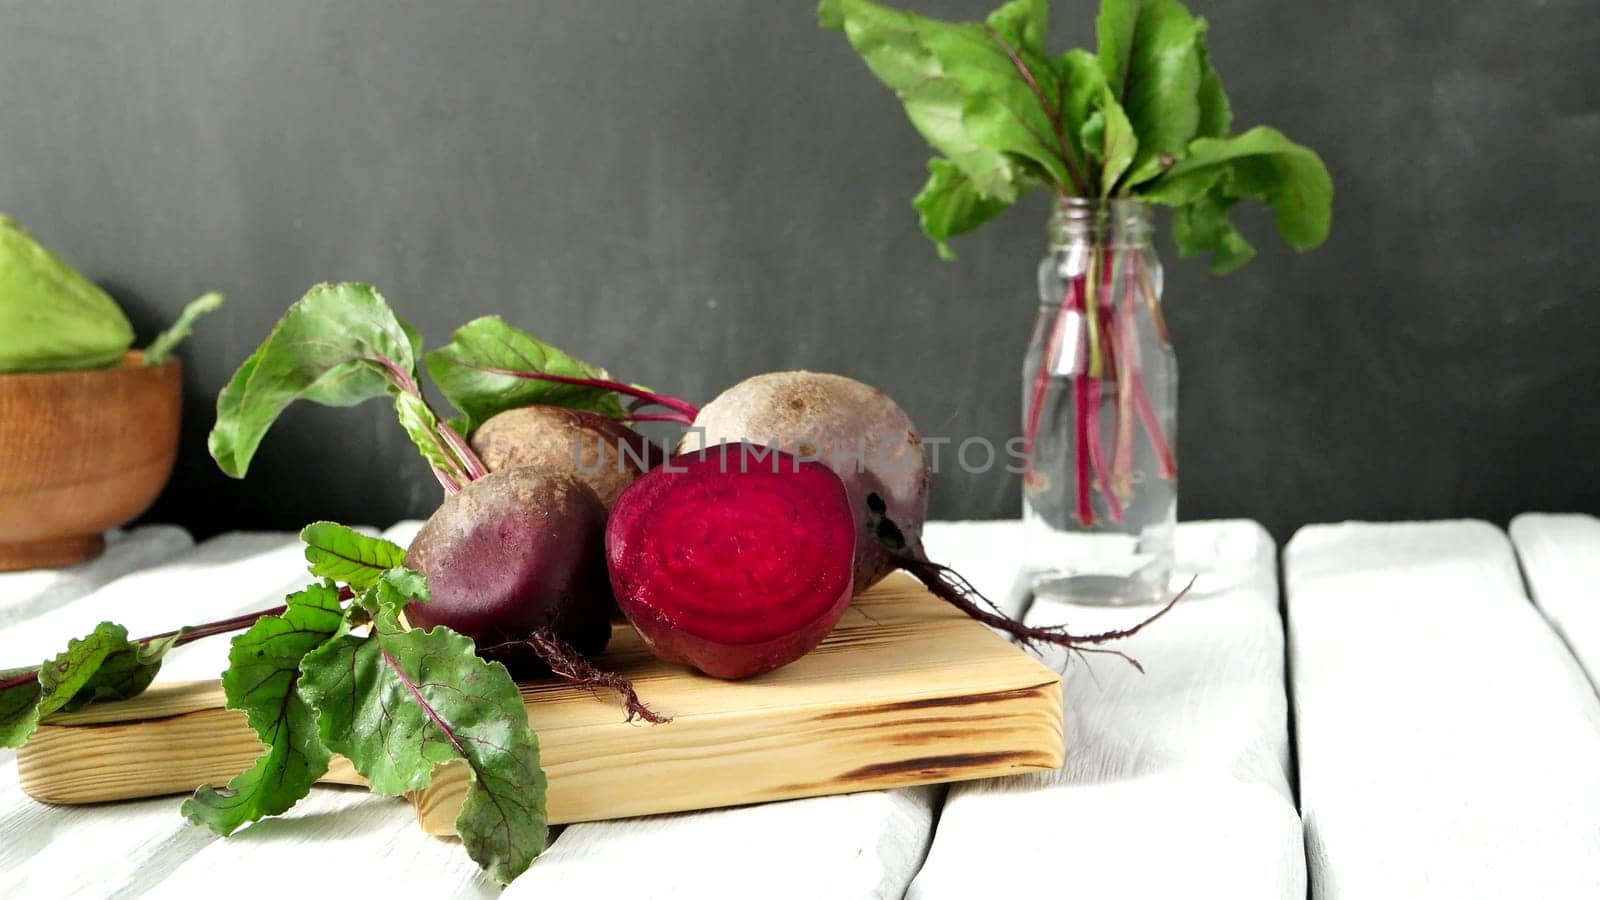 Beetroots rustic wooden table  by homydesign